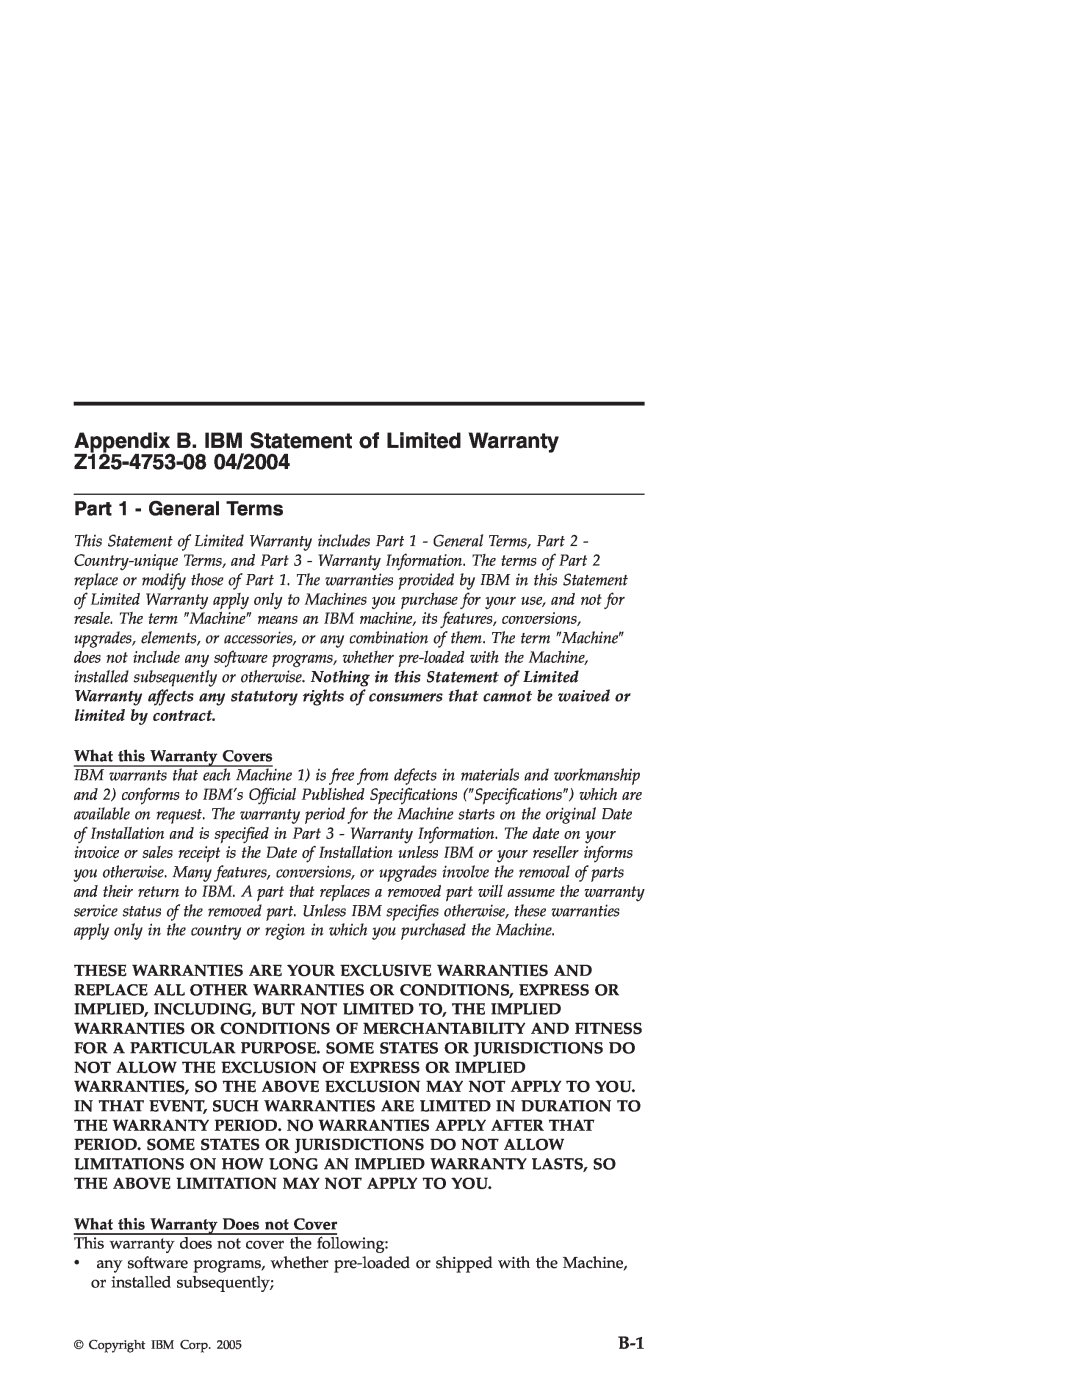 IBM X4 manual Appendix B. IBM Statement of Limited Warranty Z125-4753-08 04/2004, Part 1 - General Terms 